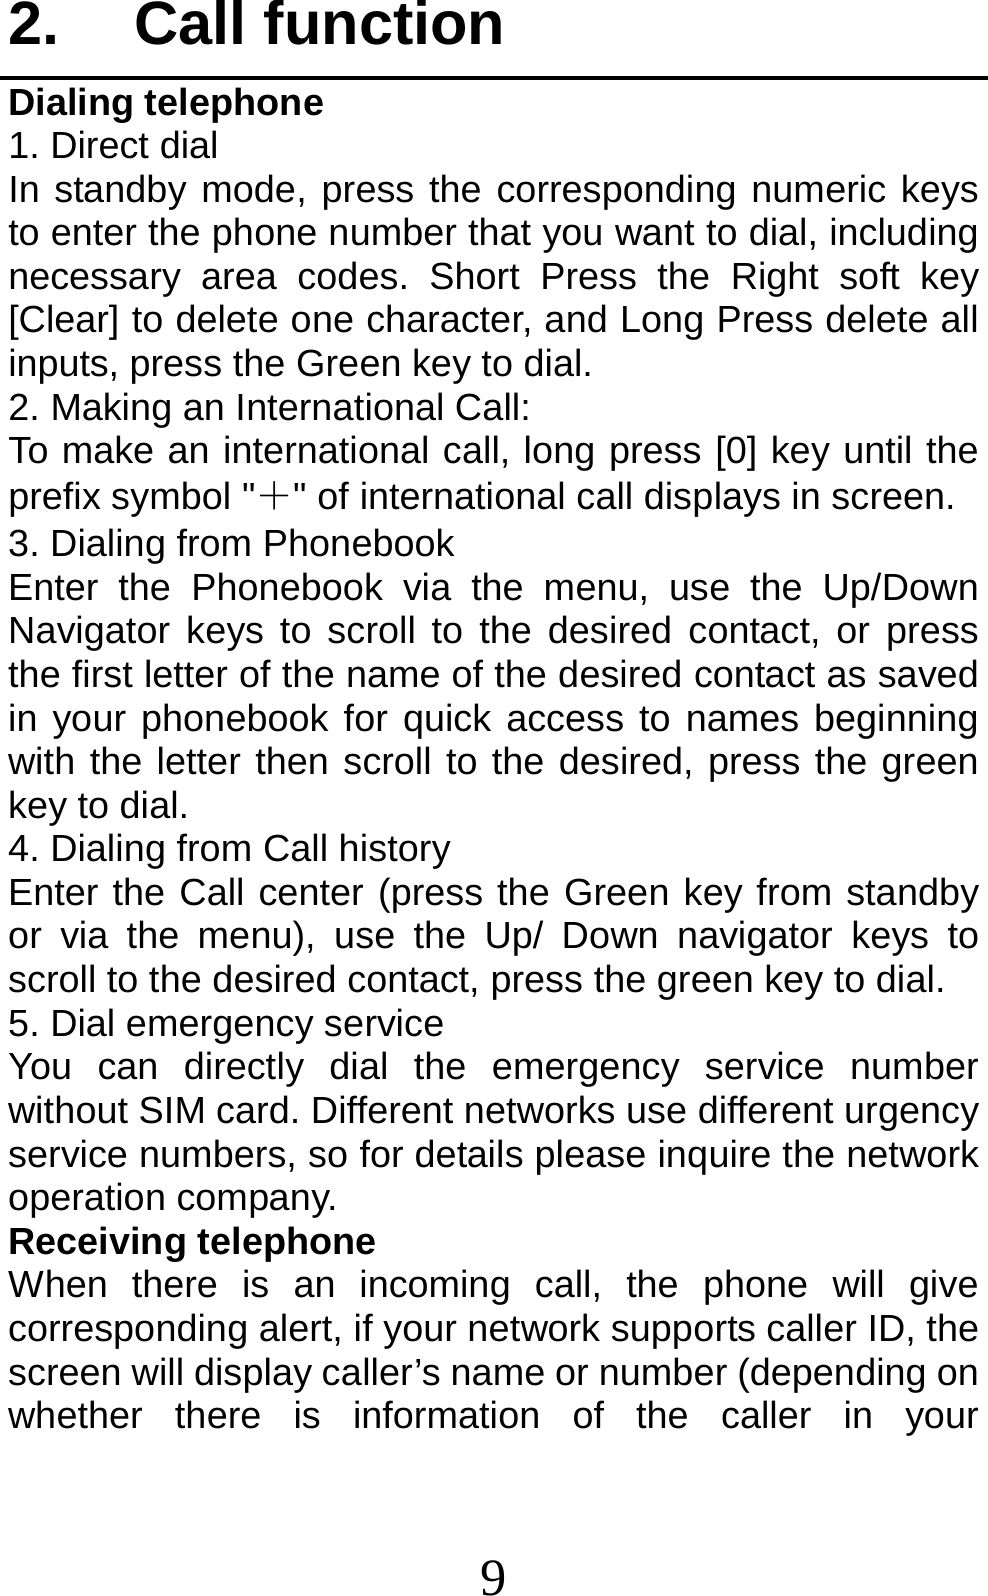 9 2. Call function Dialing telephone 1. Direct dial In standby mode, press the corresponding numeric keys to enter the phone number that you want to dial, including necessary area codes. Short Press the Right soft key [Clear] to delete one character, and Long Press delete all inputs, press the Green key to dial. 2. Making an International Call: To make an international call, long press [0] key until the prefix symbol &quot;＋&quot; of international call displays in screen. 3. Dialing from Phonebook   Enter the Phonebook via the menu, use the Up/Down Navigator keys to scroll to the desired contact, or press the first letter of the name of the desired contact as saved in your phonebook for quick access to names beginning with the letter then scroll to the desired, press the green key to dial. 4. Dialing from Call history Enter the Call center (press the Green key from standby or via the menu), use the Up/ Down navigator keys to scroll to the desired contact, press the green key to dial. 5. Dial emergency service You can directly dial the emergency service number without SIM card. Different networks use different urgency service numbers, so for details please inquire the network operation company. Receiving telephone When there is an incoming call, the phone will give corresponding alert, if your network supports caller ID, the screen will display caller’s name or number (depending on whether there is information of the caller in your 